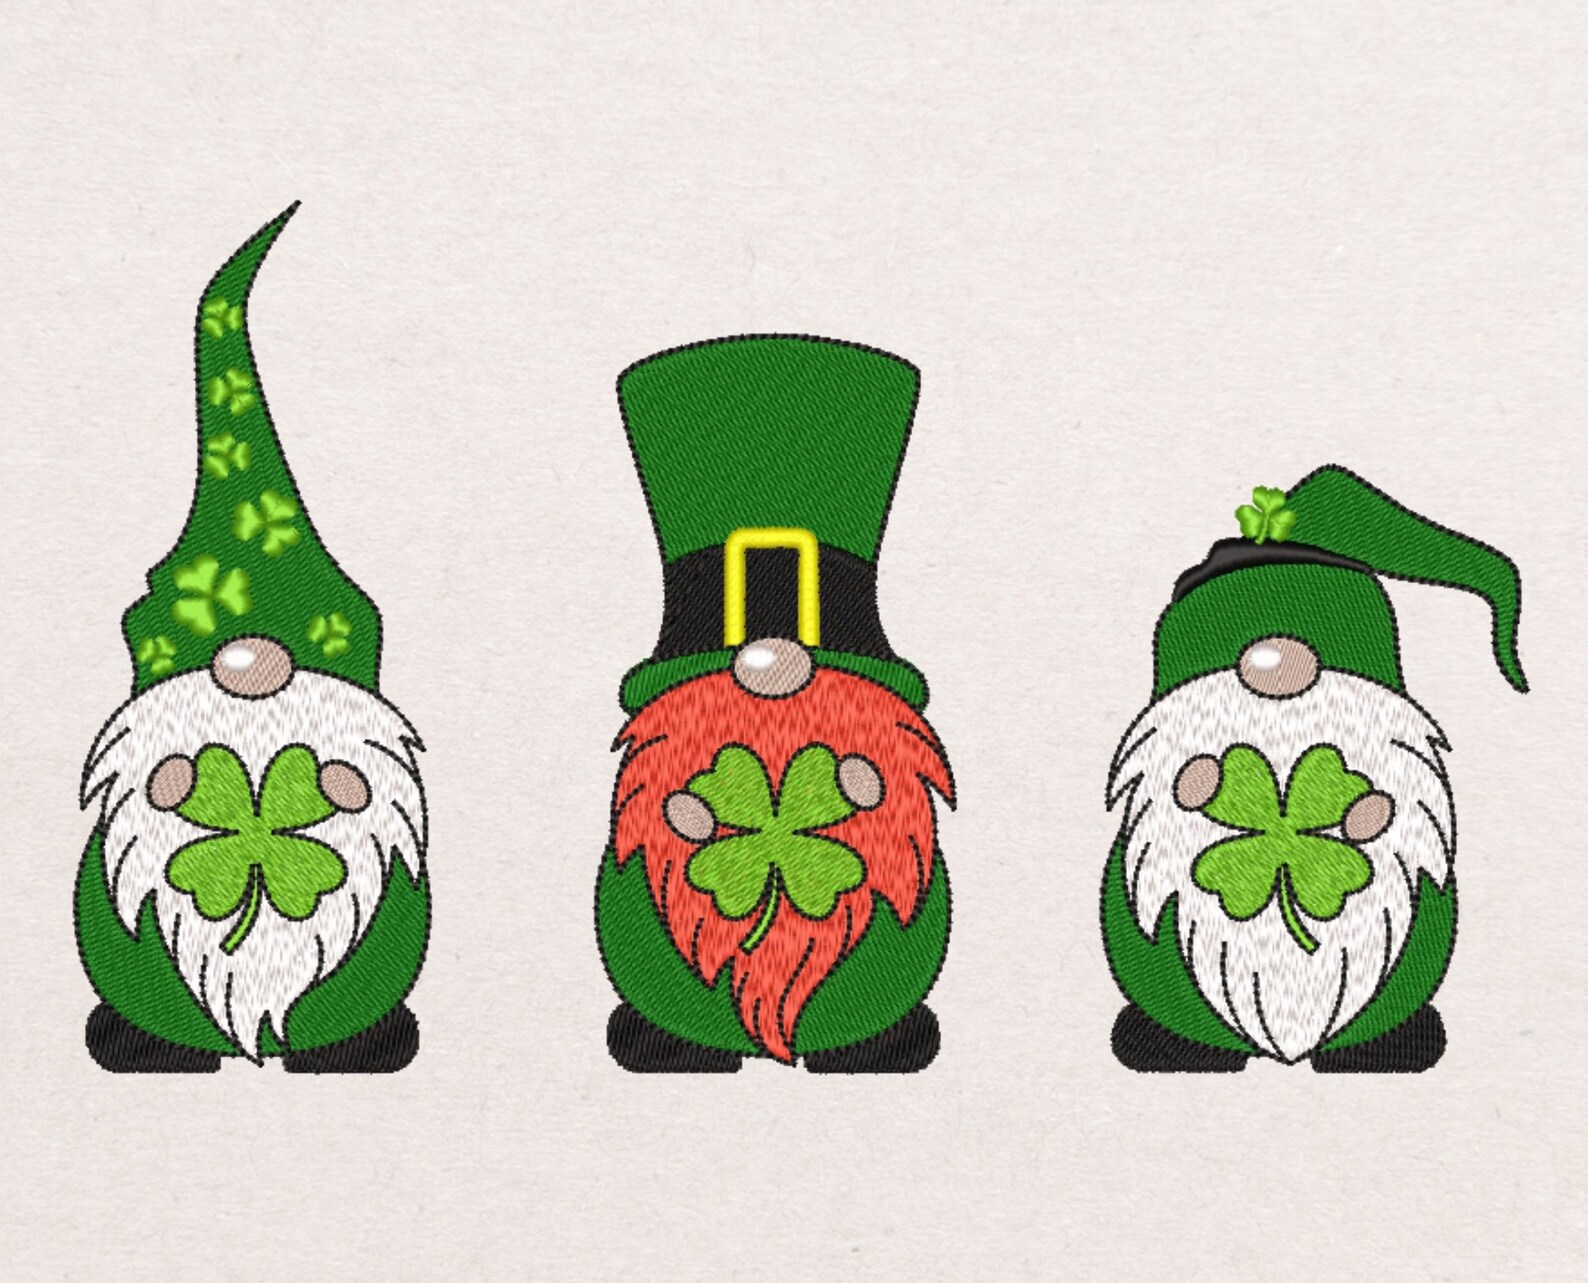 St. Patricks day gnomes embroidery design | Etsy